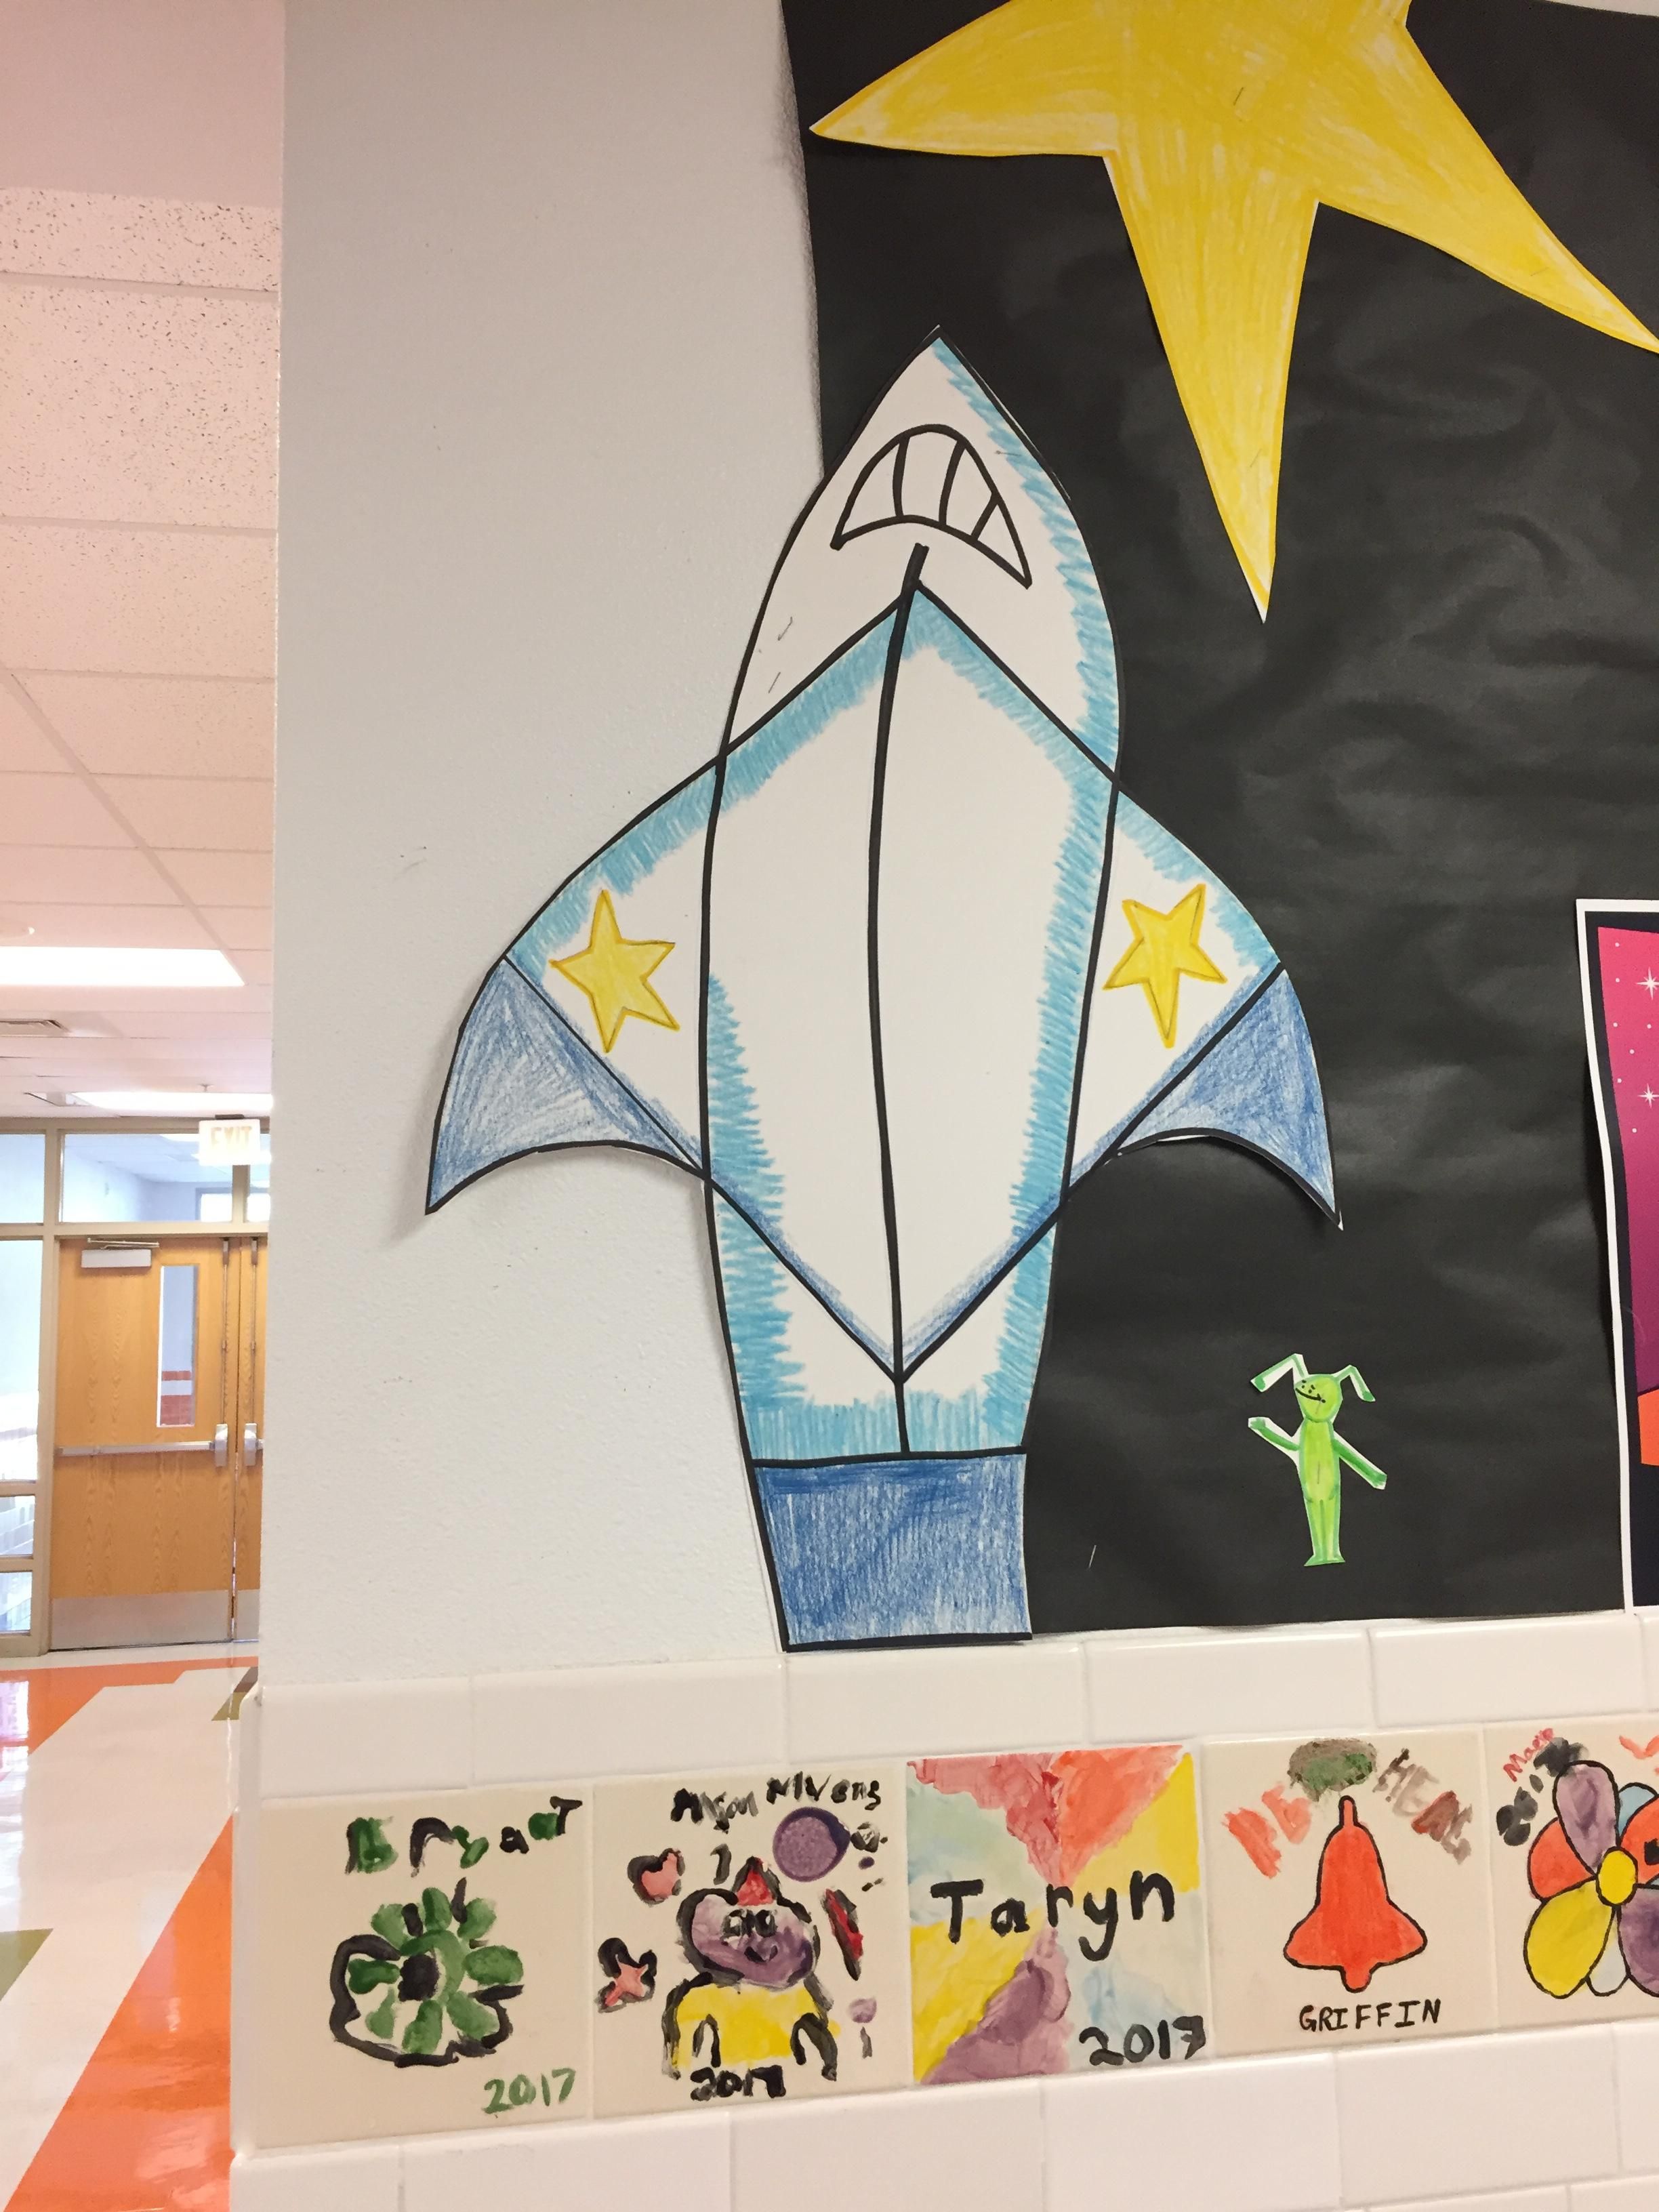 I was at my daughter's school today. I asked her why there was a shark ripping off its shirt....."mom, that's a rocket ship".